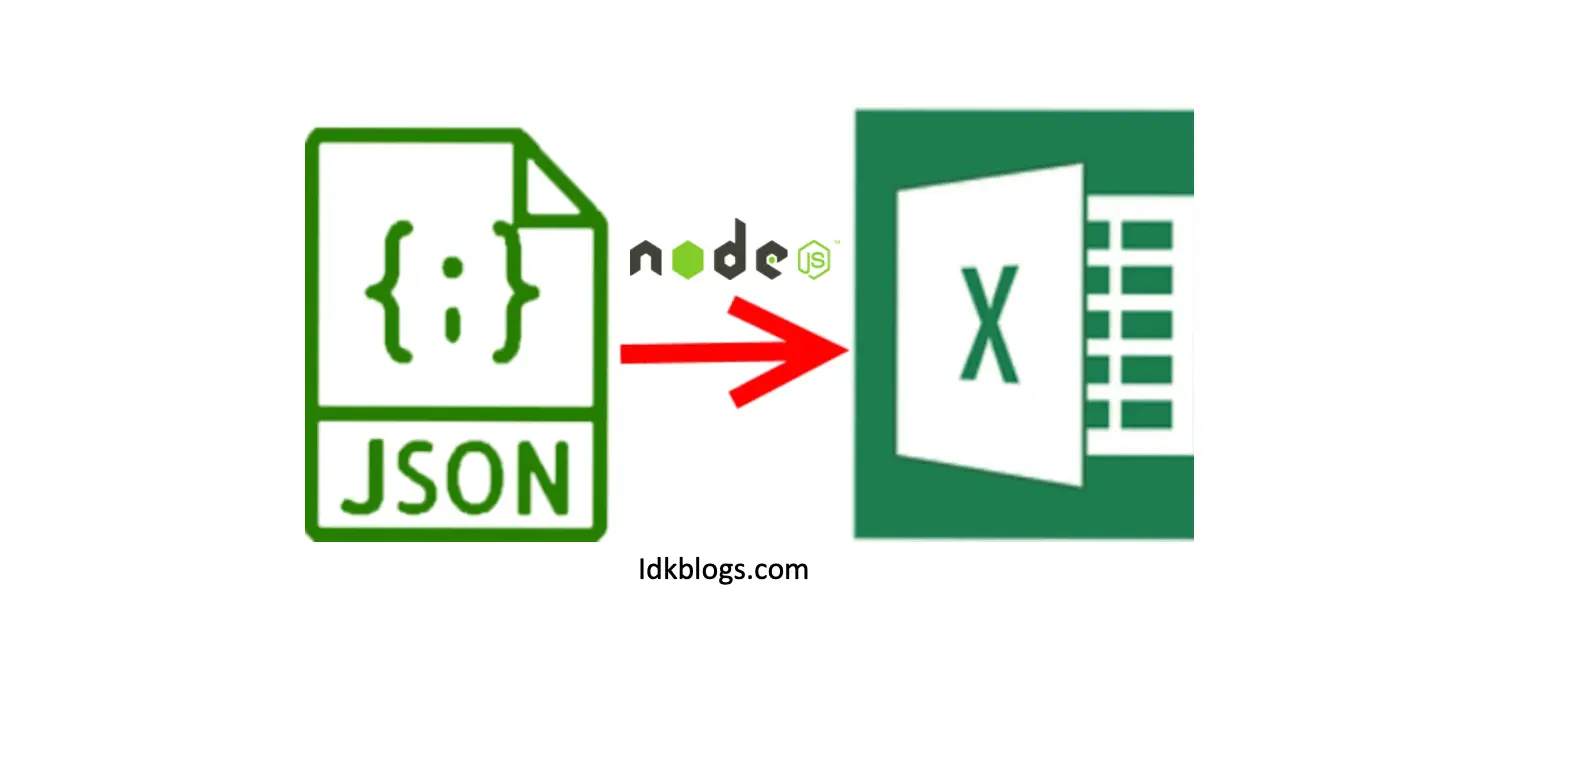 Insert an array of objects data into an excel sheet and download it: NodeJS